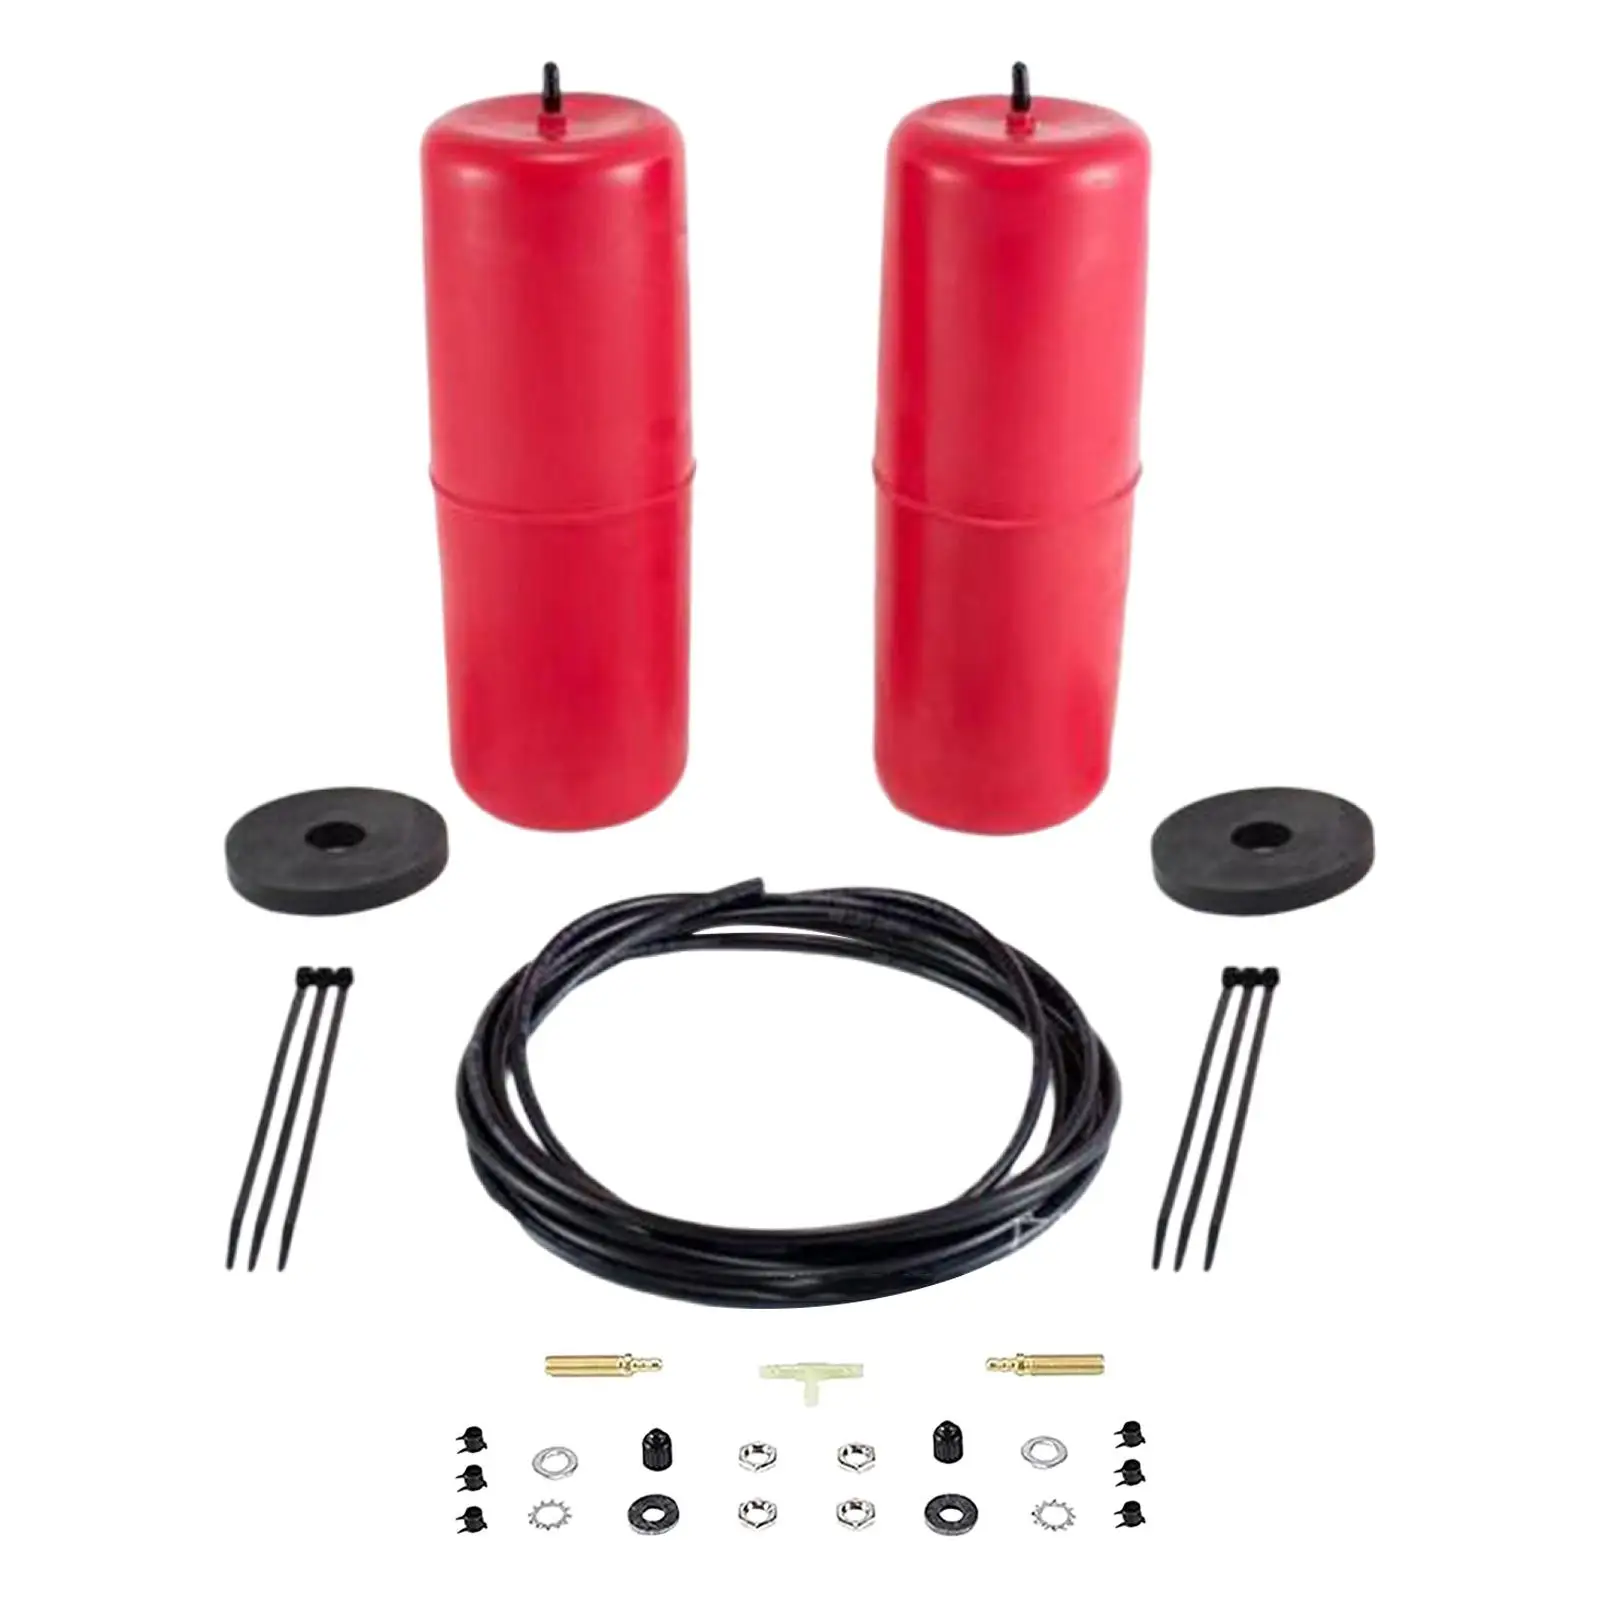 Air Suspension Kit 60818 Accessories 1000 lbs Load Professional Manufacturing